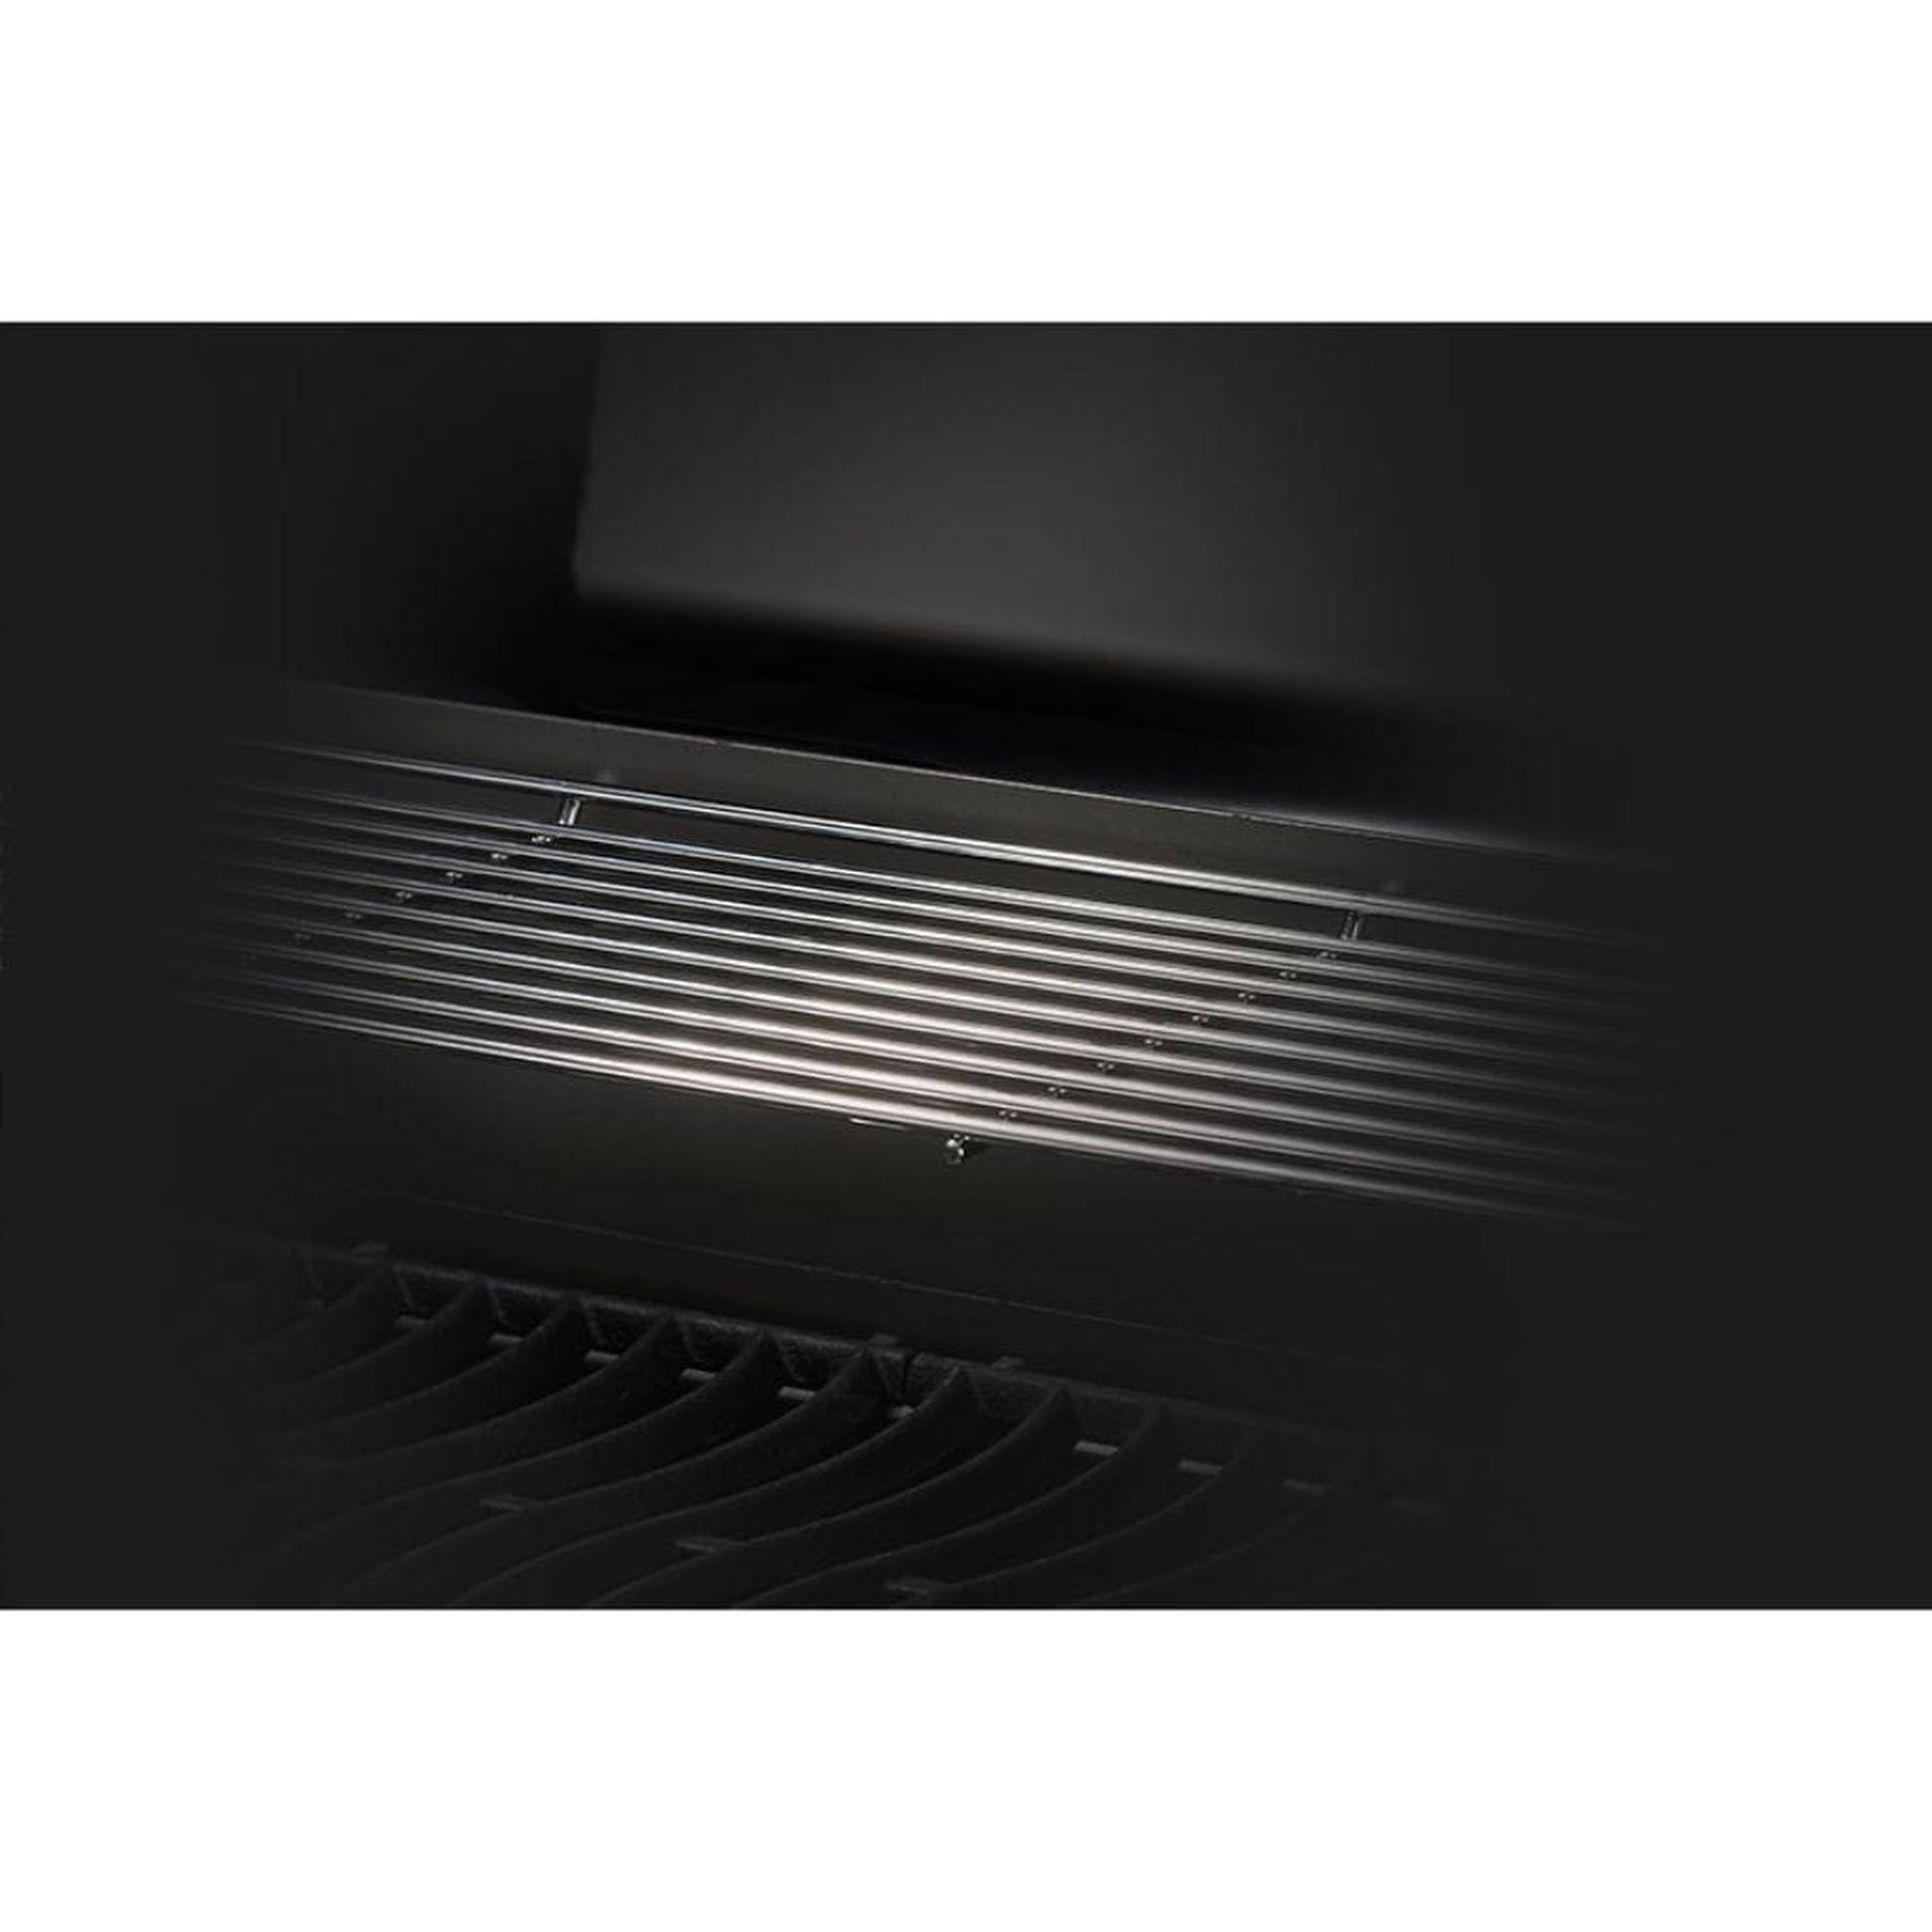 Napoleon 51" Rogue 425 Gas Freestanding Grill